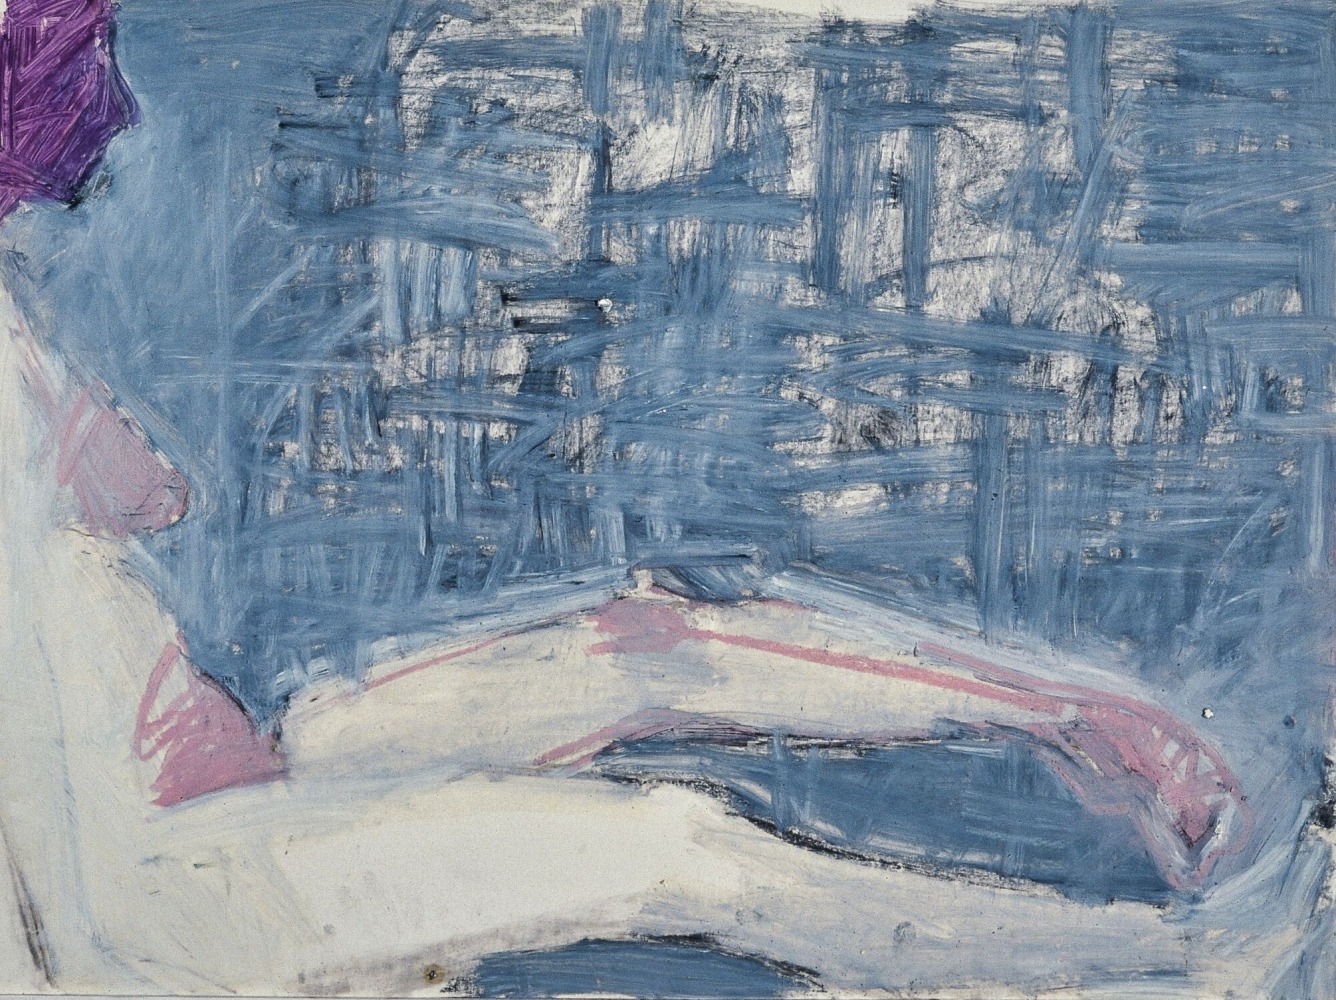 La Palestra Drawing No. 2

1988

Oil-based pigments, charcoal on paper

30 1/8 x 40 inches

76.5 x 101.6cm